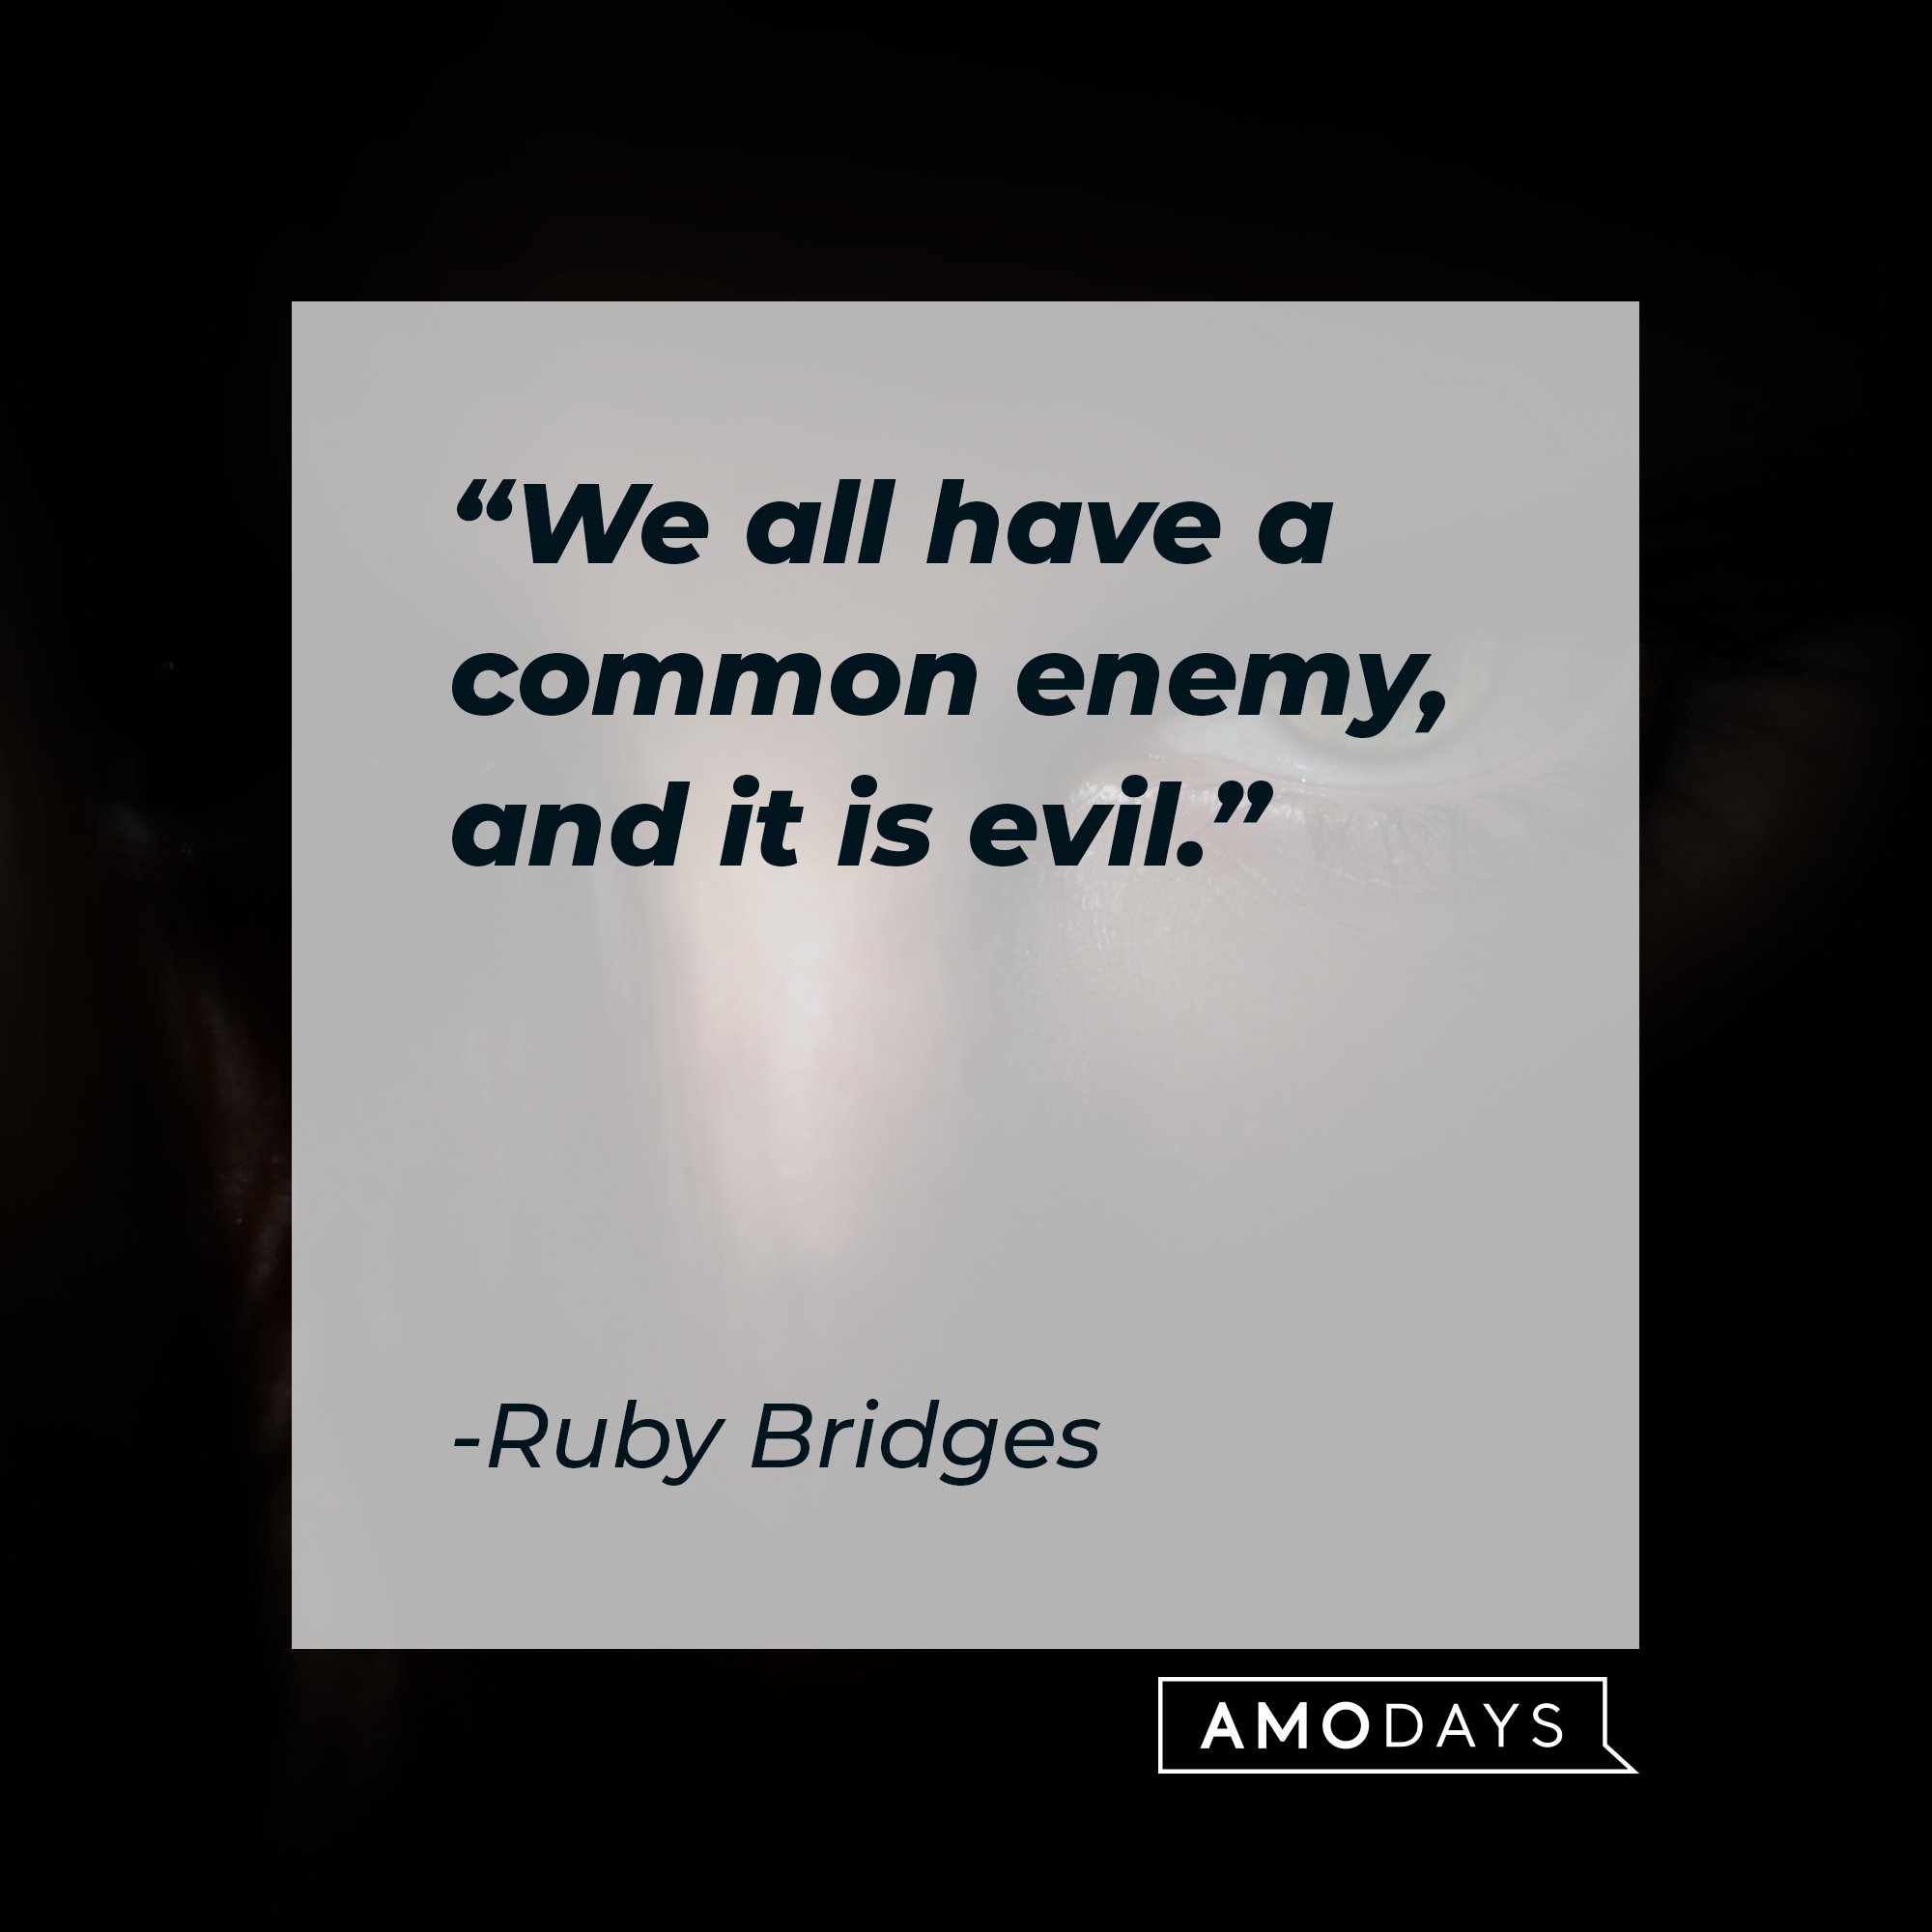  Ruby Bridges’ quote: “We all have a common enemy, and it is evil.” | Image: AmoDays 